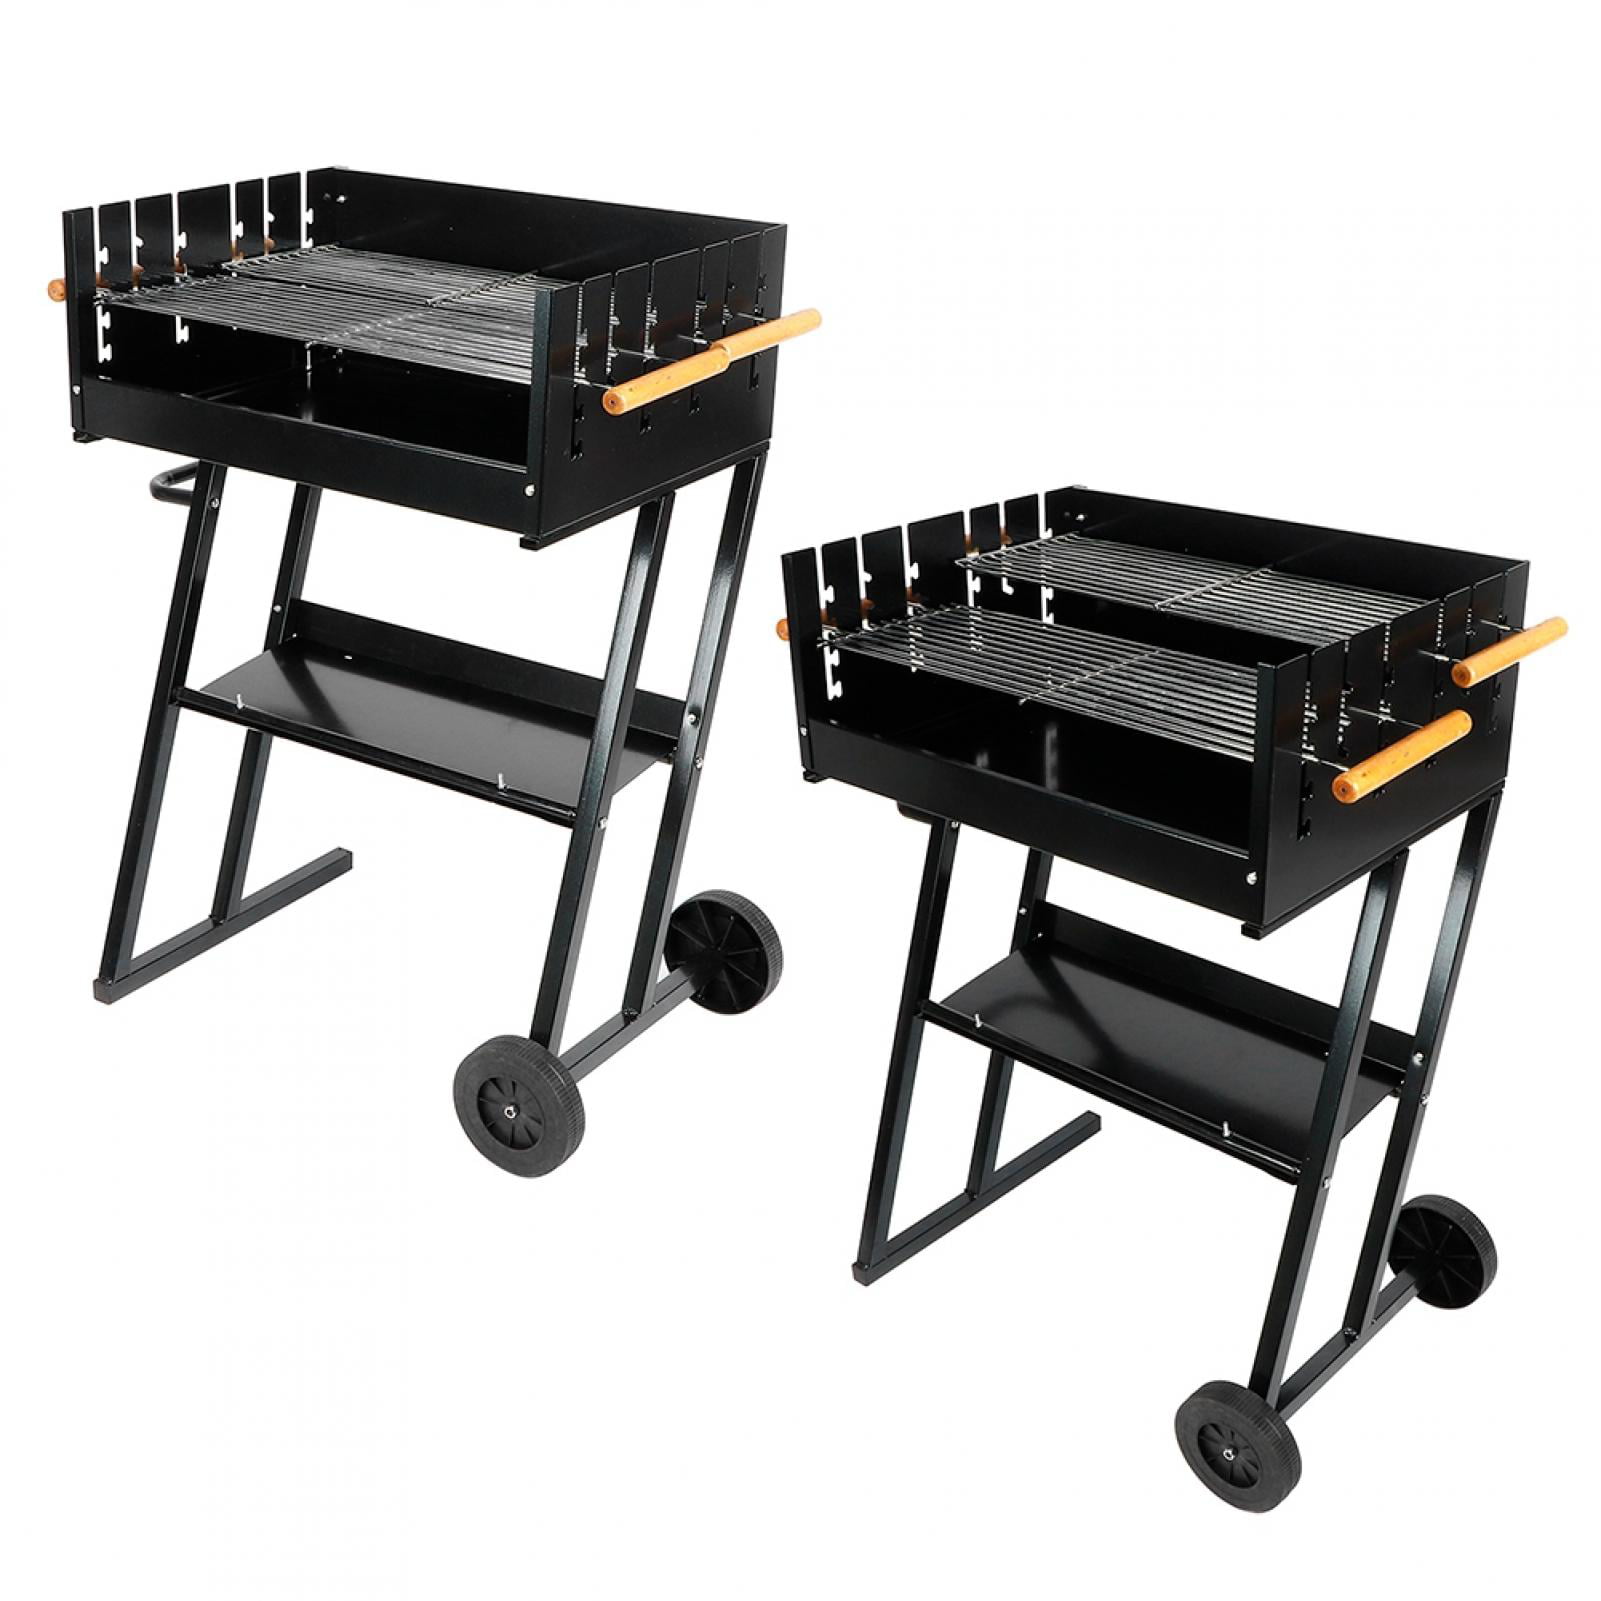 Details about   Charcoal BBQ Grill Trolley Barbecue Patio Outdoor Garden Summer Party 